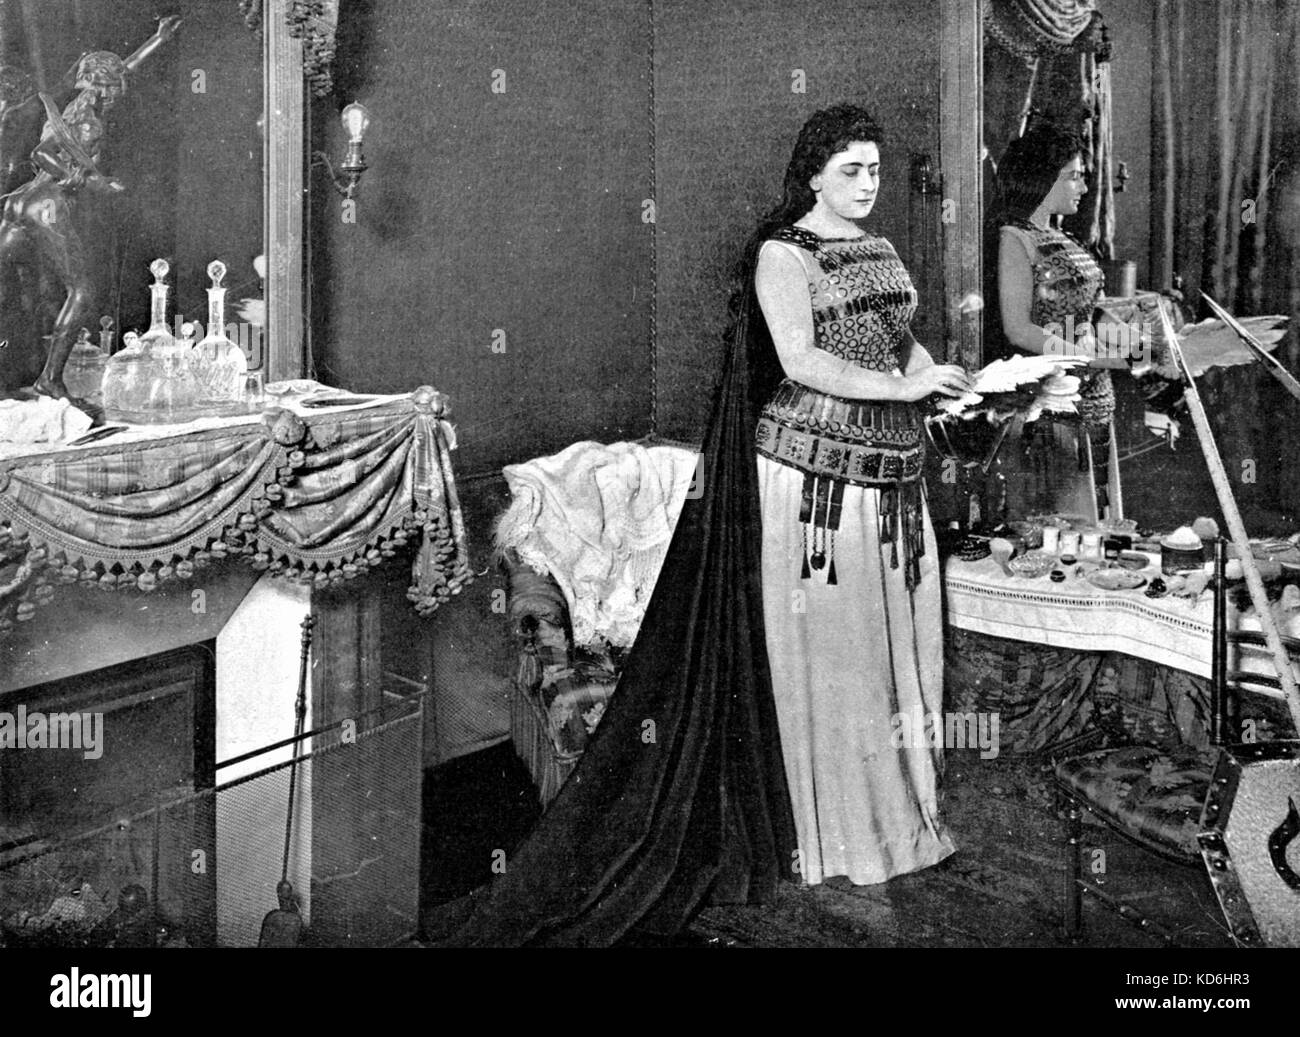 Lucienne Bréval in her dressing-room at the Opéra in Paris, 1898.  At the time of her performance in  'Die Walküre', dressed as Brünnhilde.   Swiss born French soprano, 1869-1935.   Photo H. Mairet.  Le Théâtre, April 1898. Stock Photo